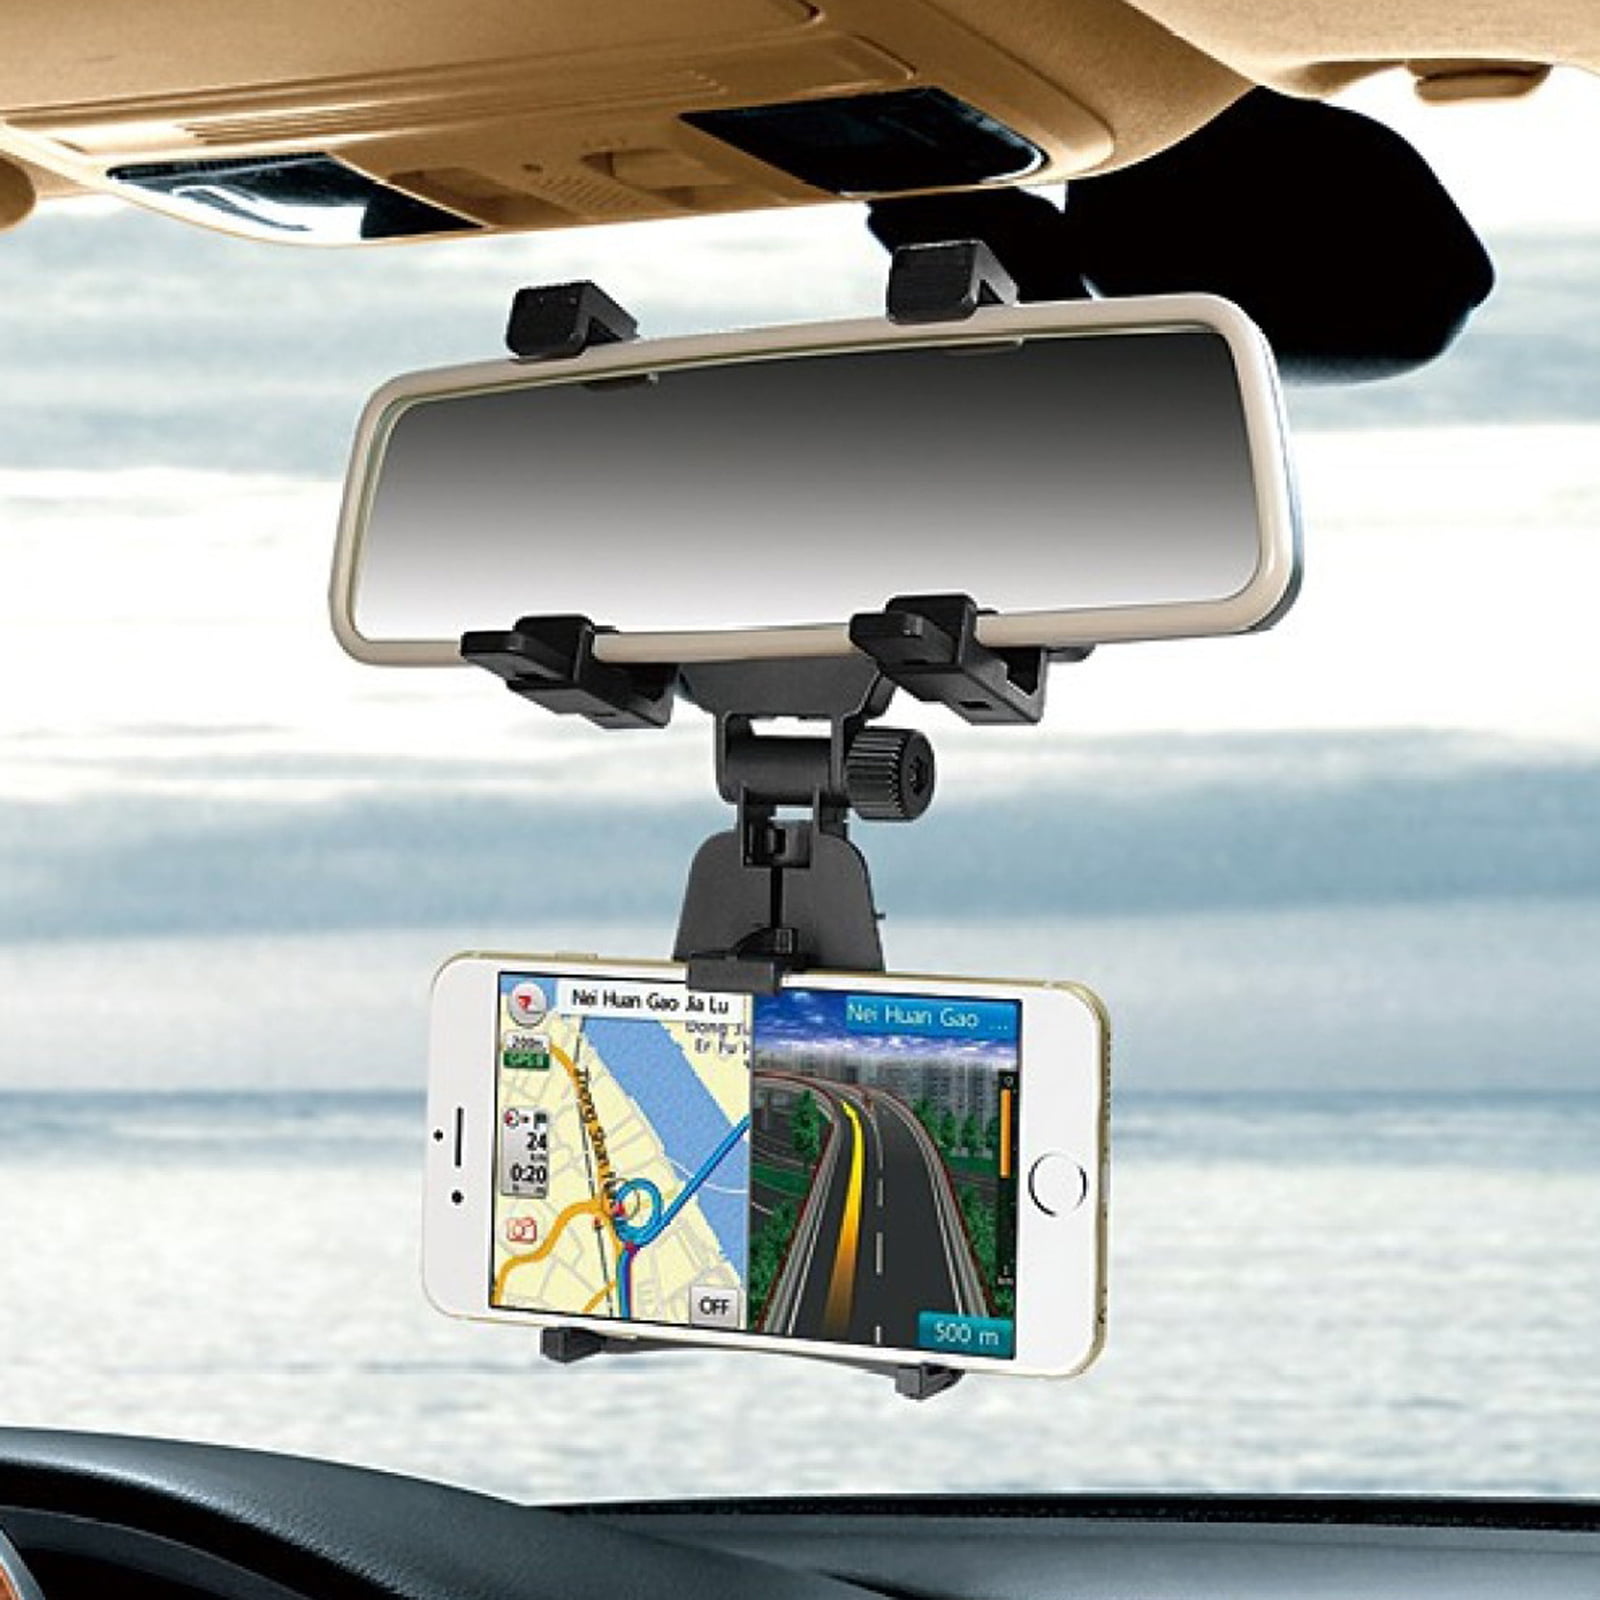 Car Rear View Mirror Mount Cradle Holder Bracket Universal For Phone iPhone LG